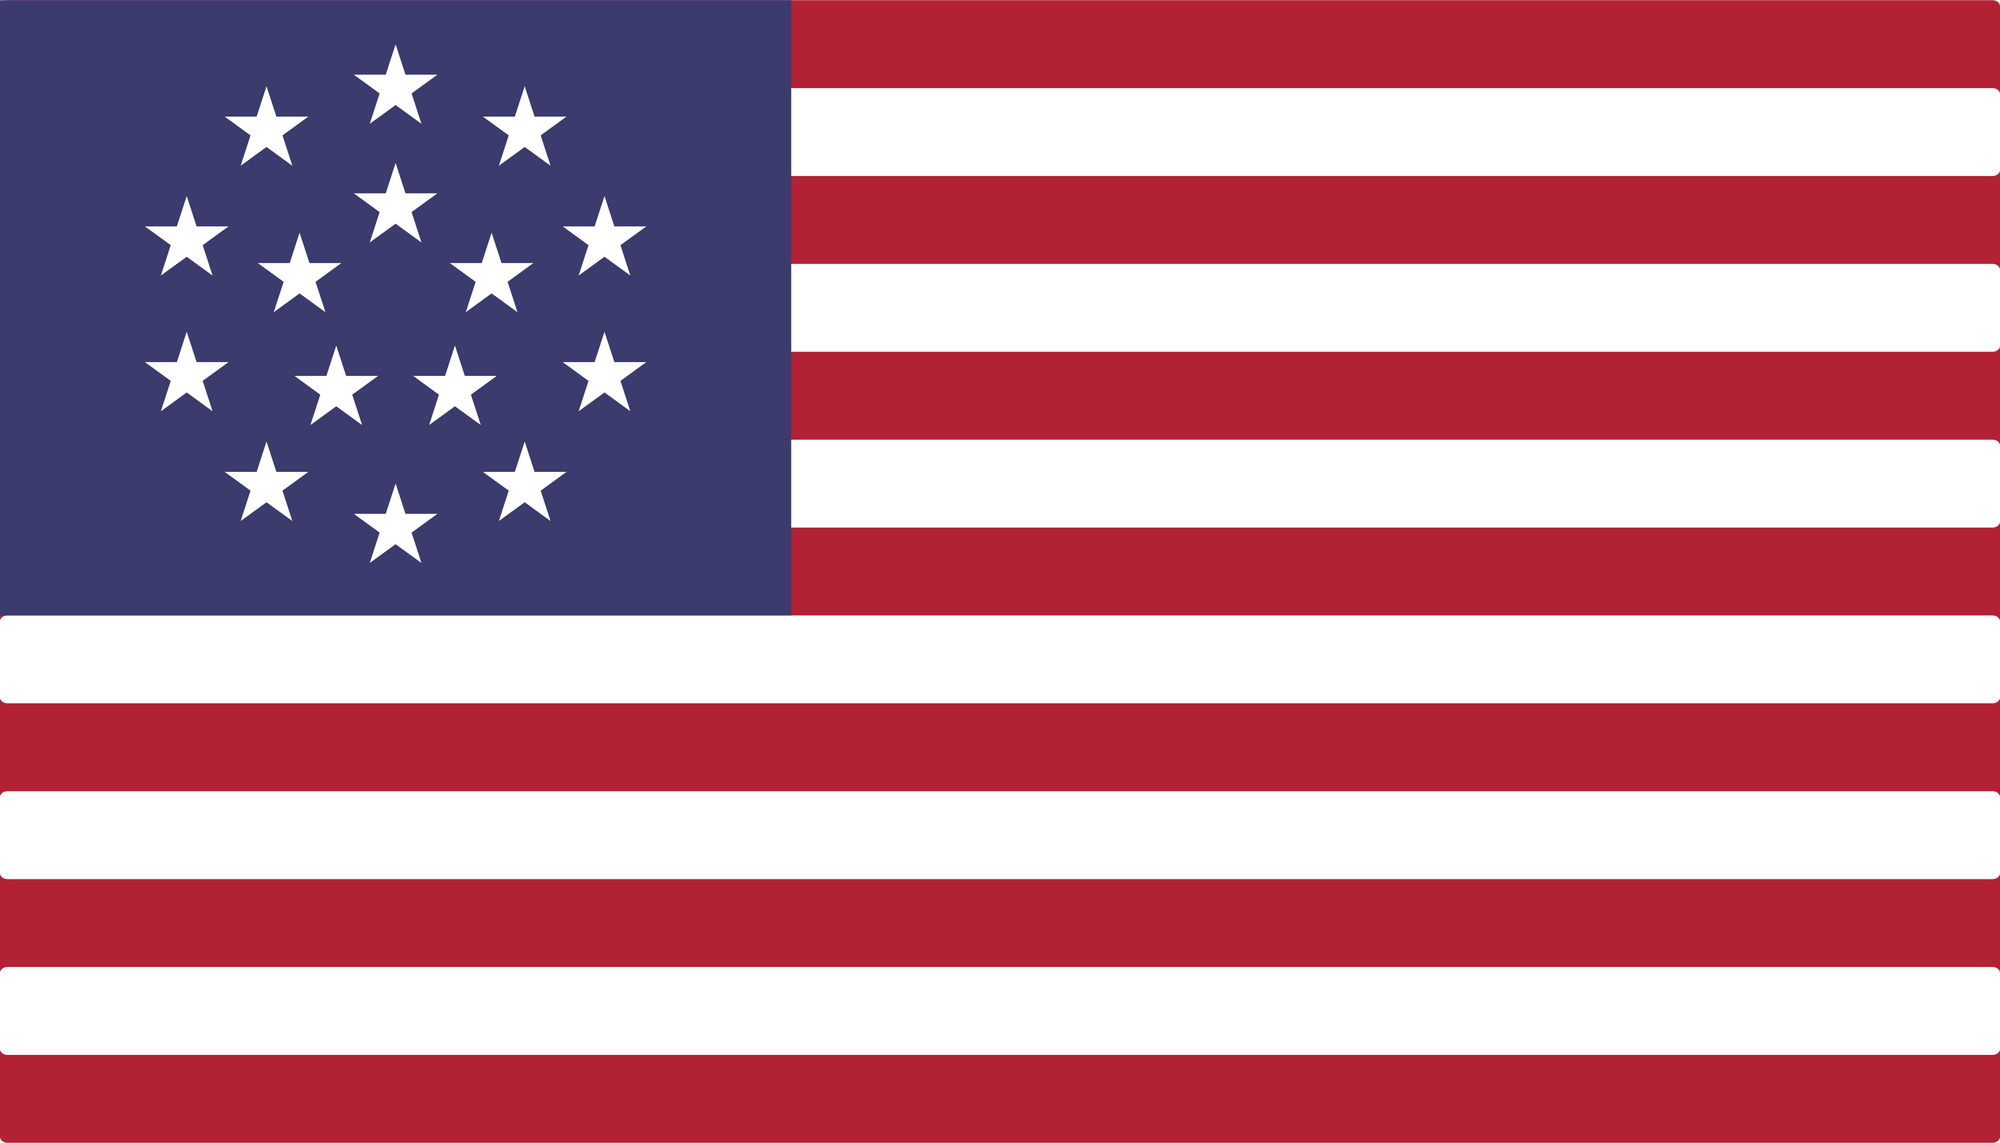 Download File:US flag with 15 stars by Hellerick, concentric ...